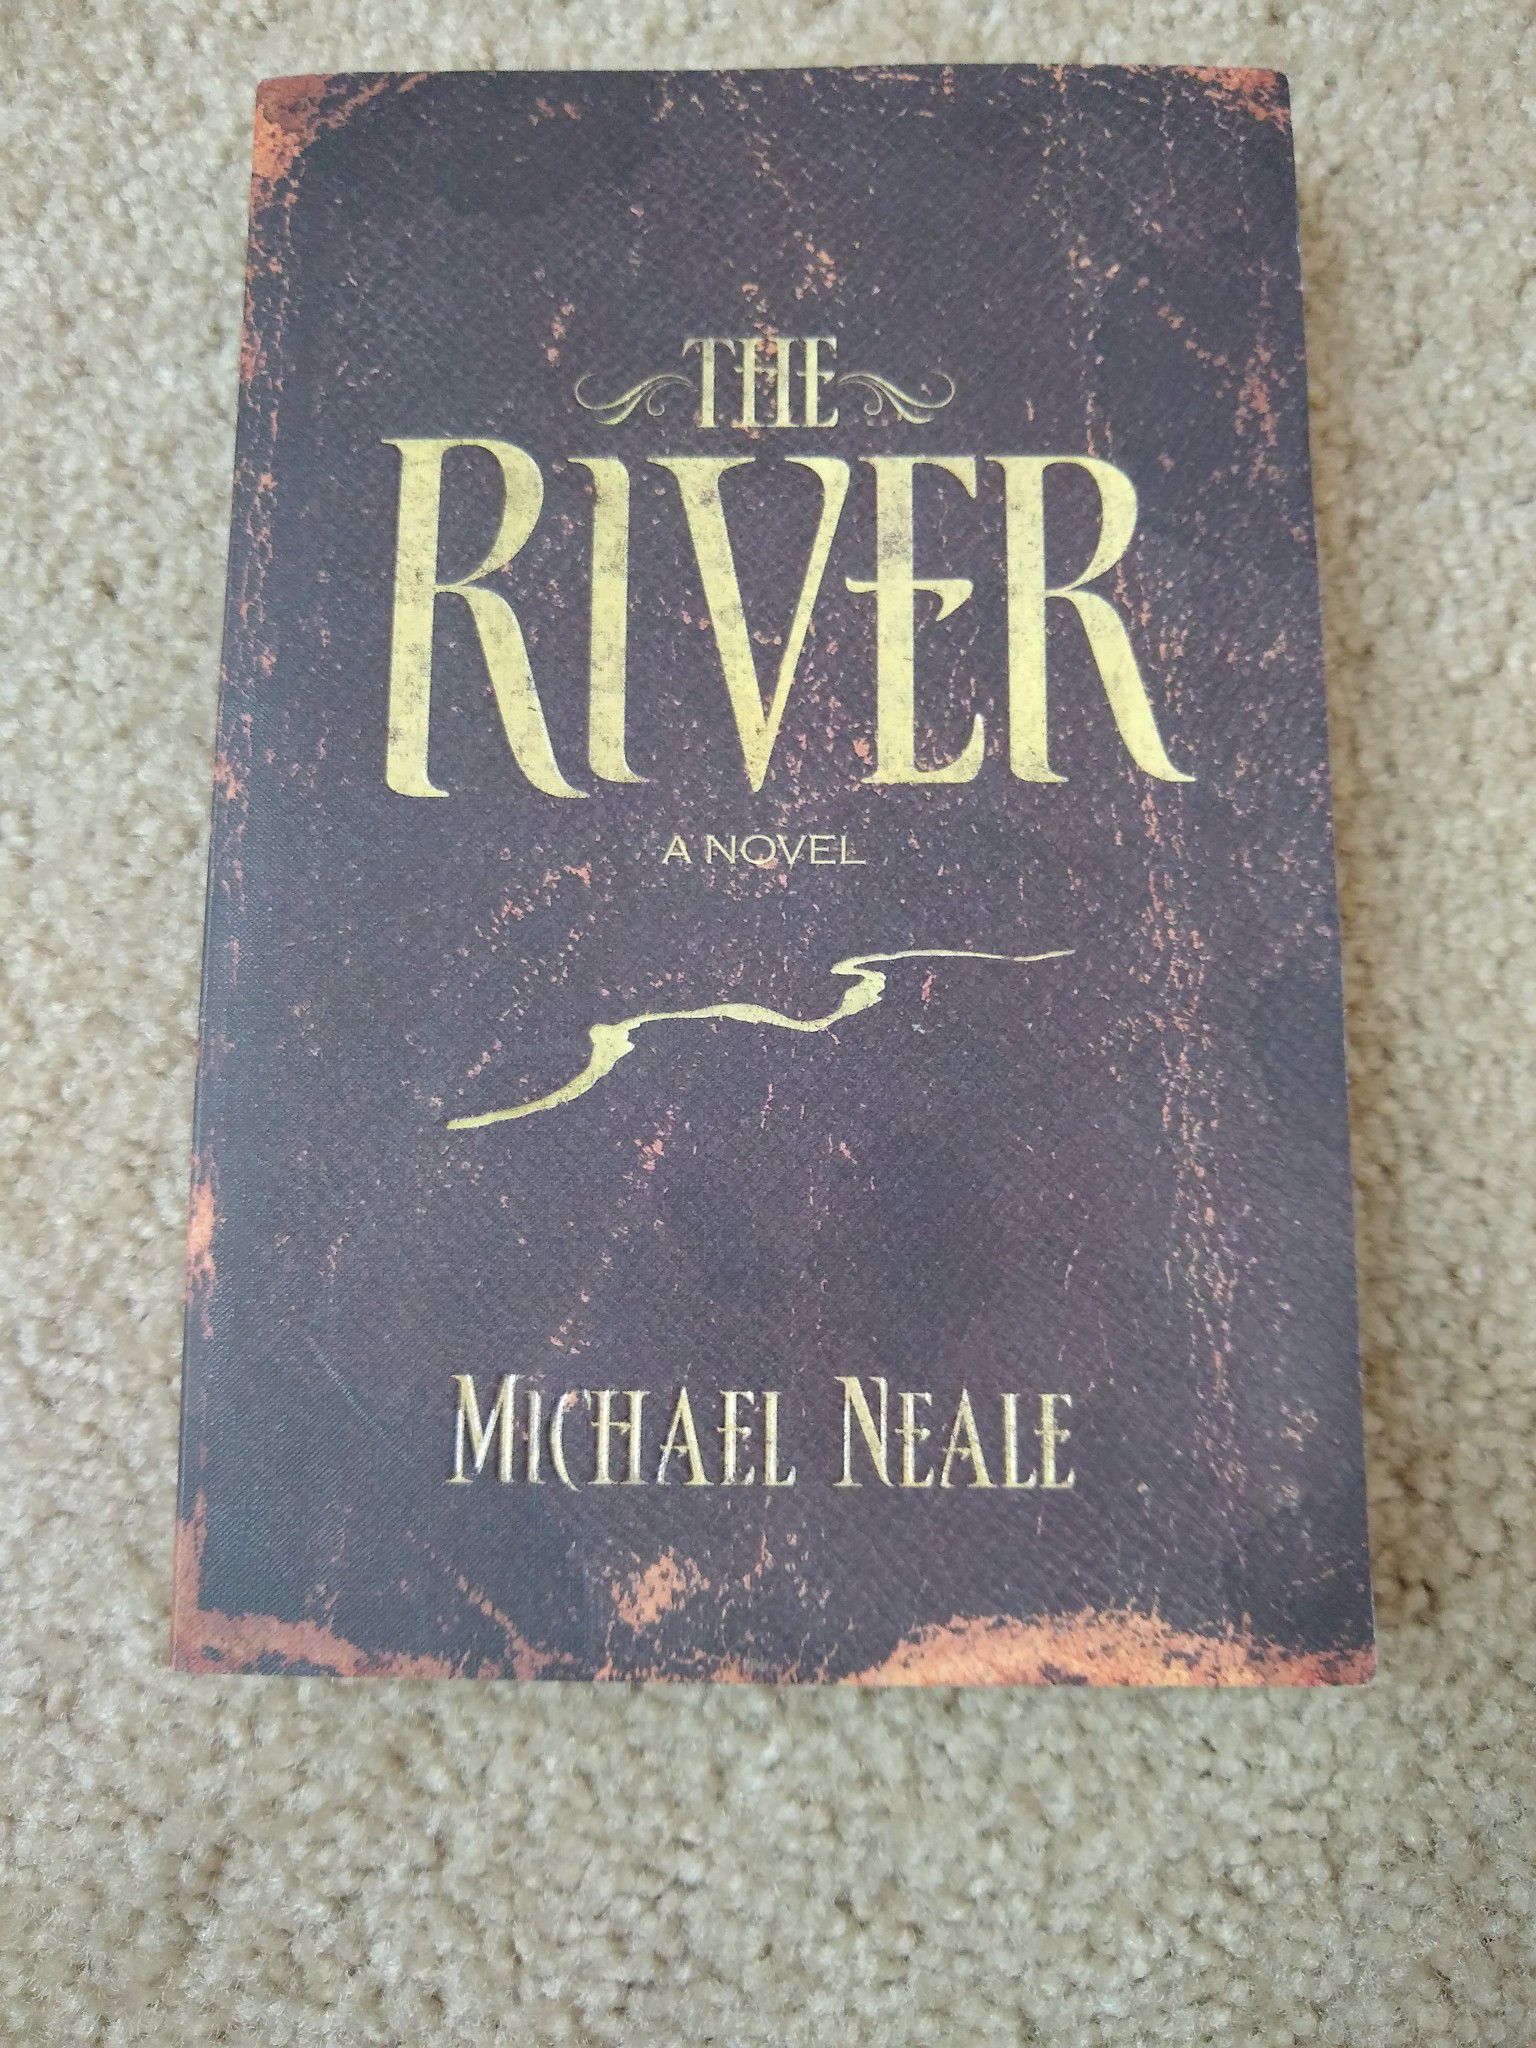 The River by Michael Neale (2012, Paperback). Condition is Brand New